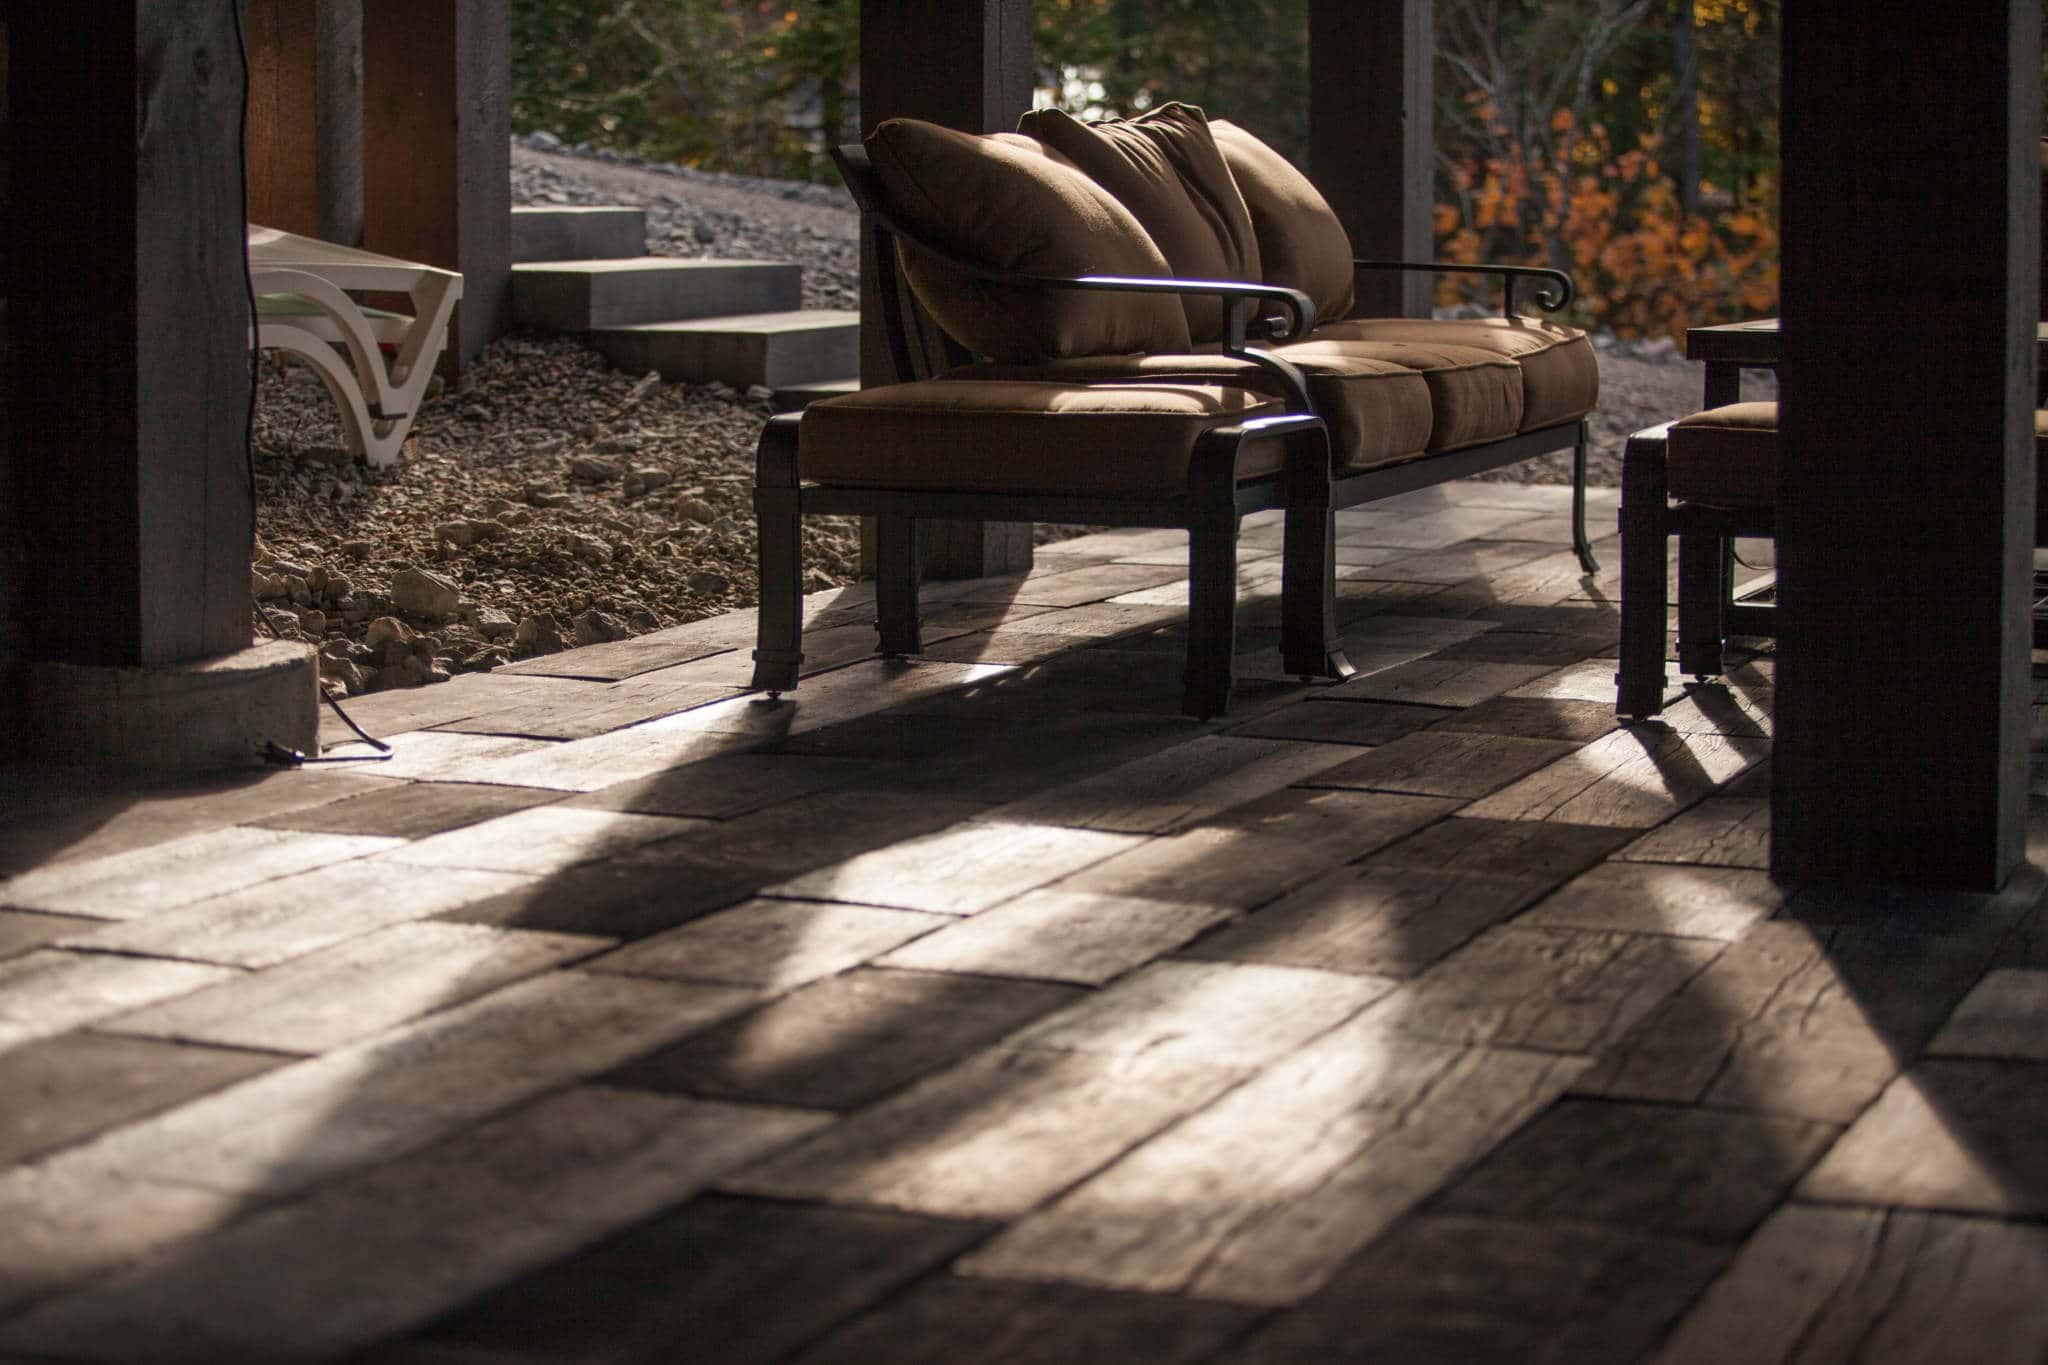 Detail of brick patio, with outdoor furniture, at cabin property.